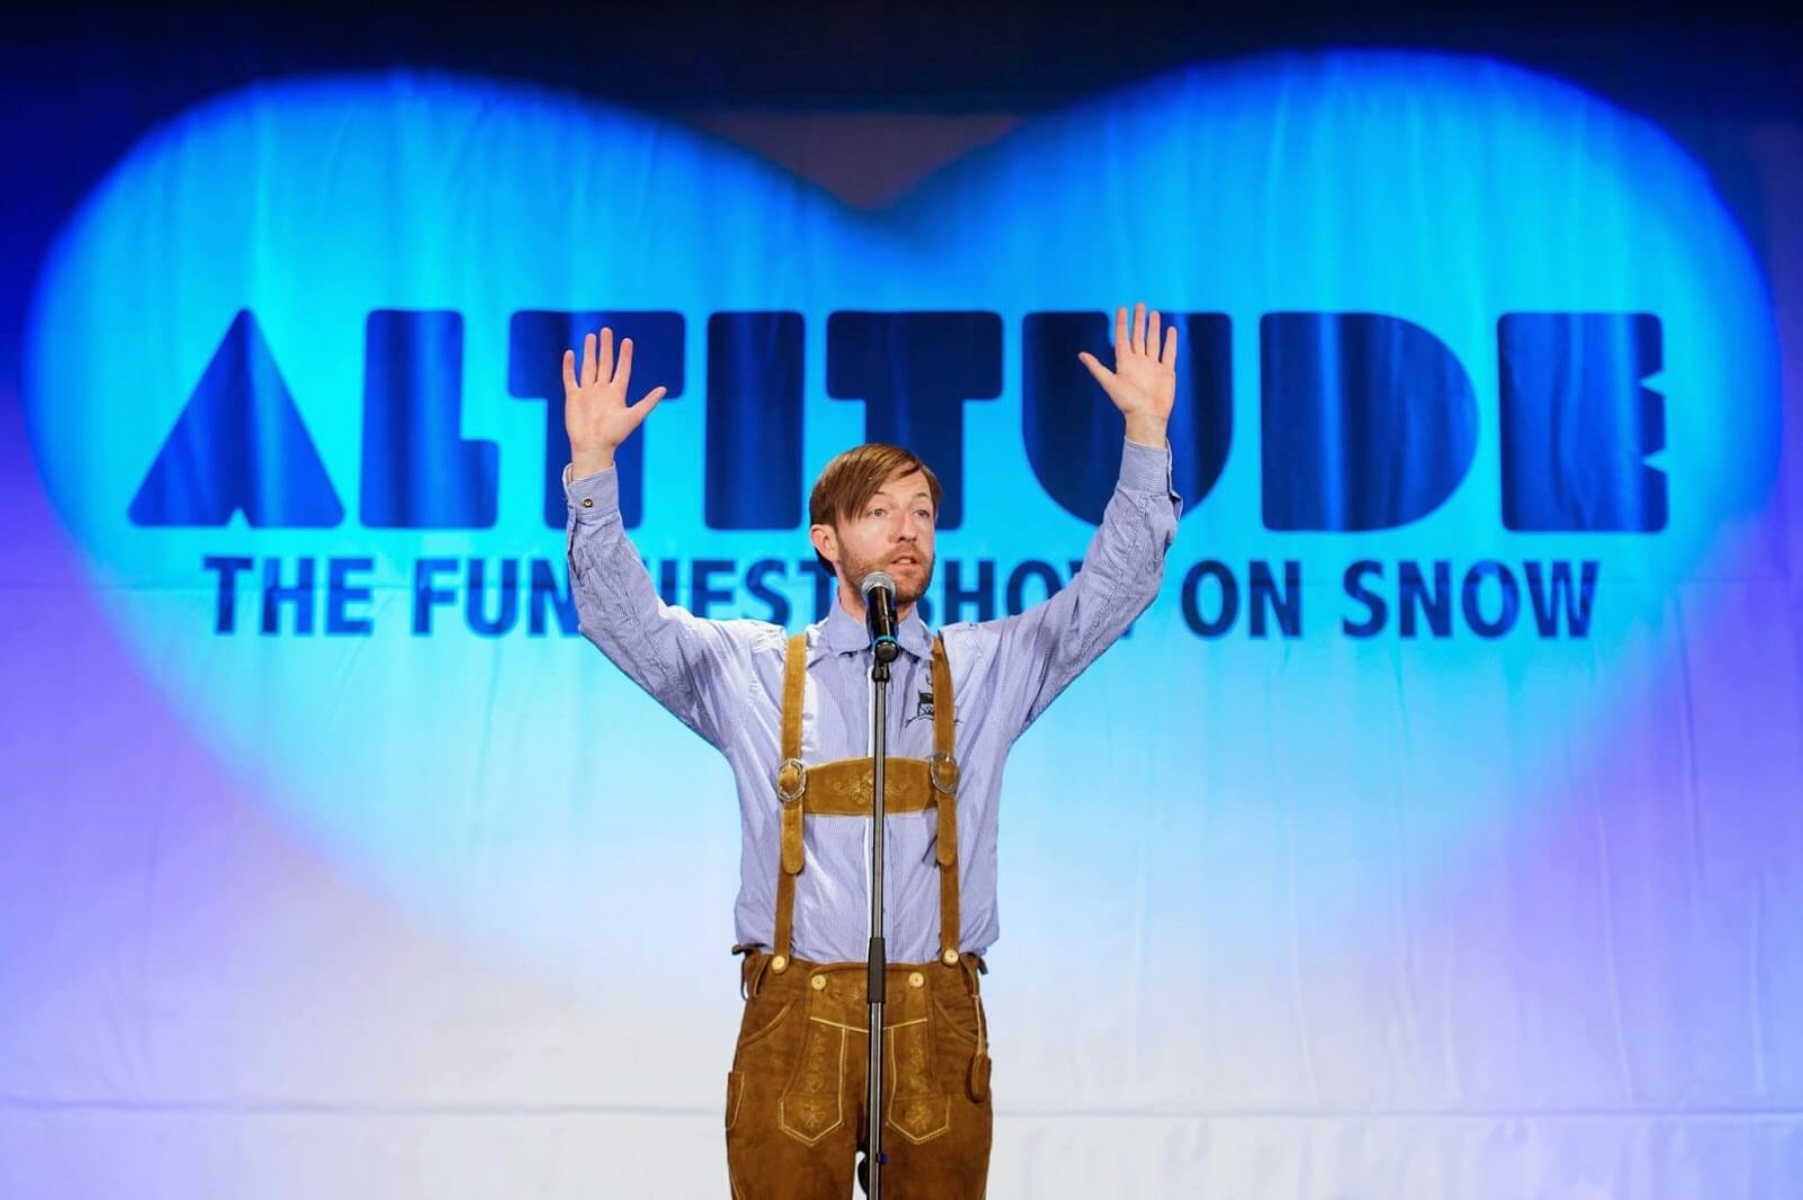 20-facts-about-altitude-comedy-festival